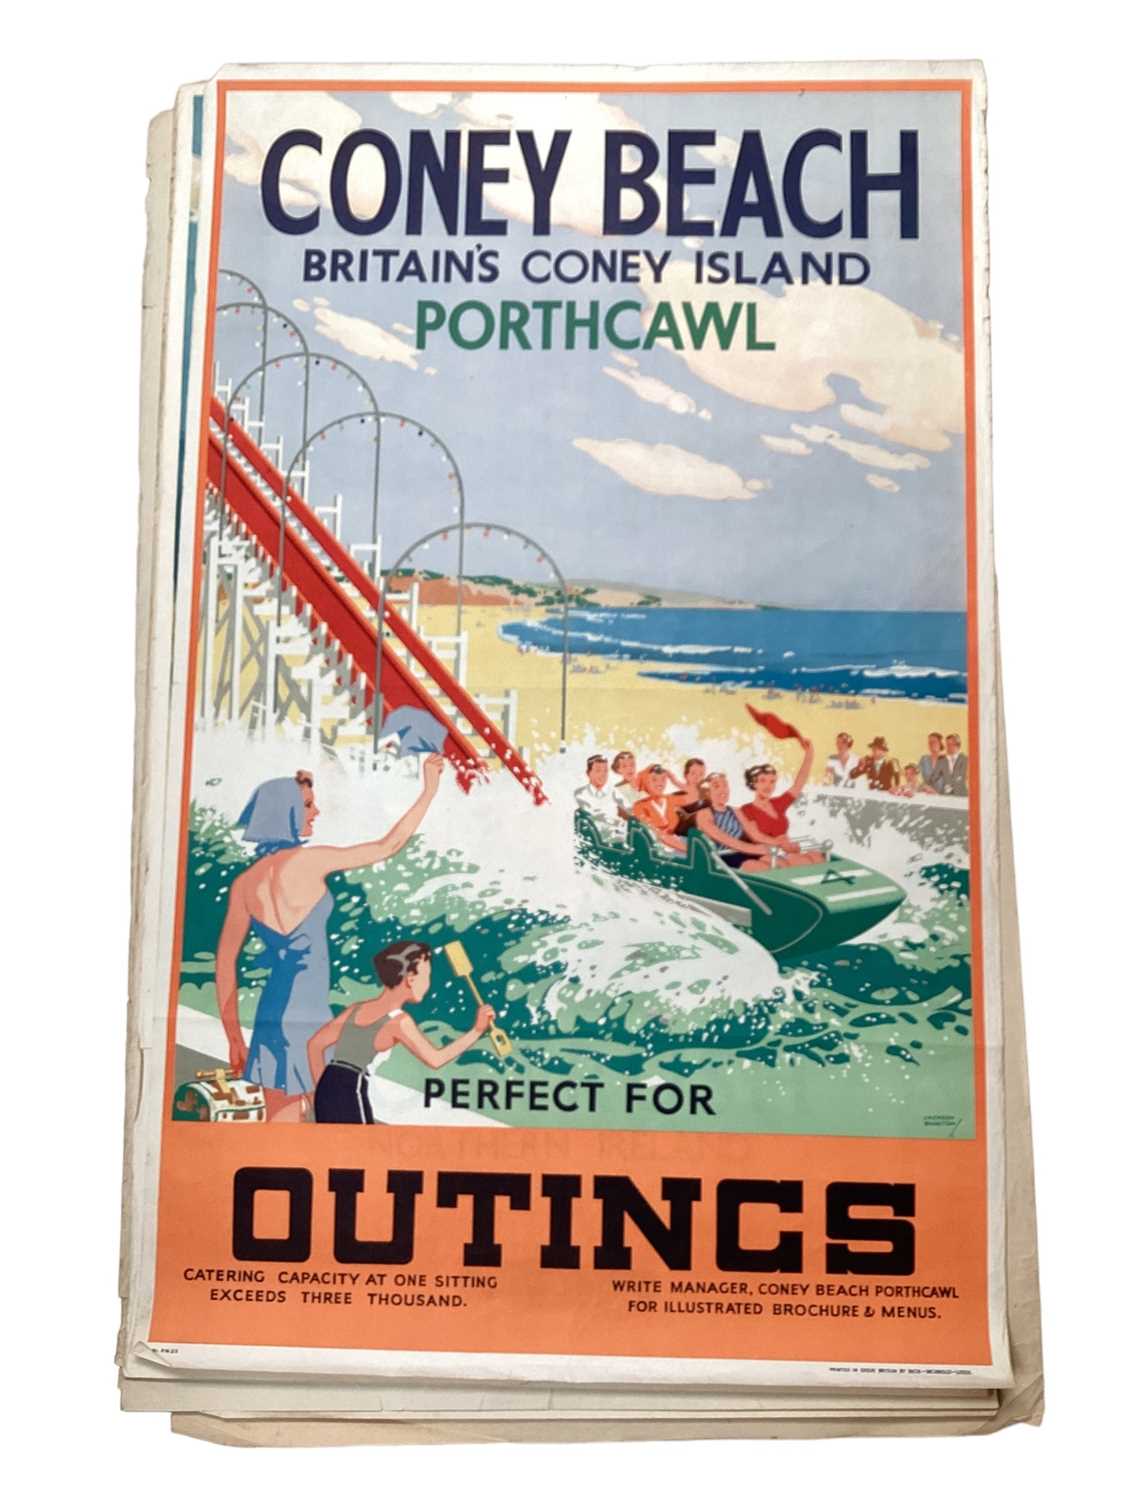 Original British Railways poster for Coney Beach, with artwork by Jackson Burton, printed by Beck-In